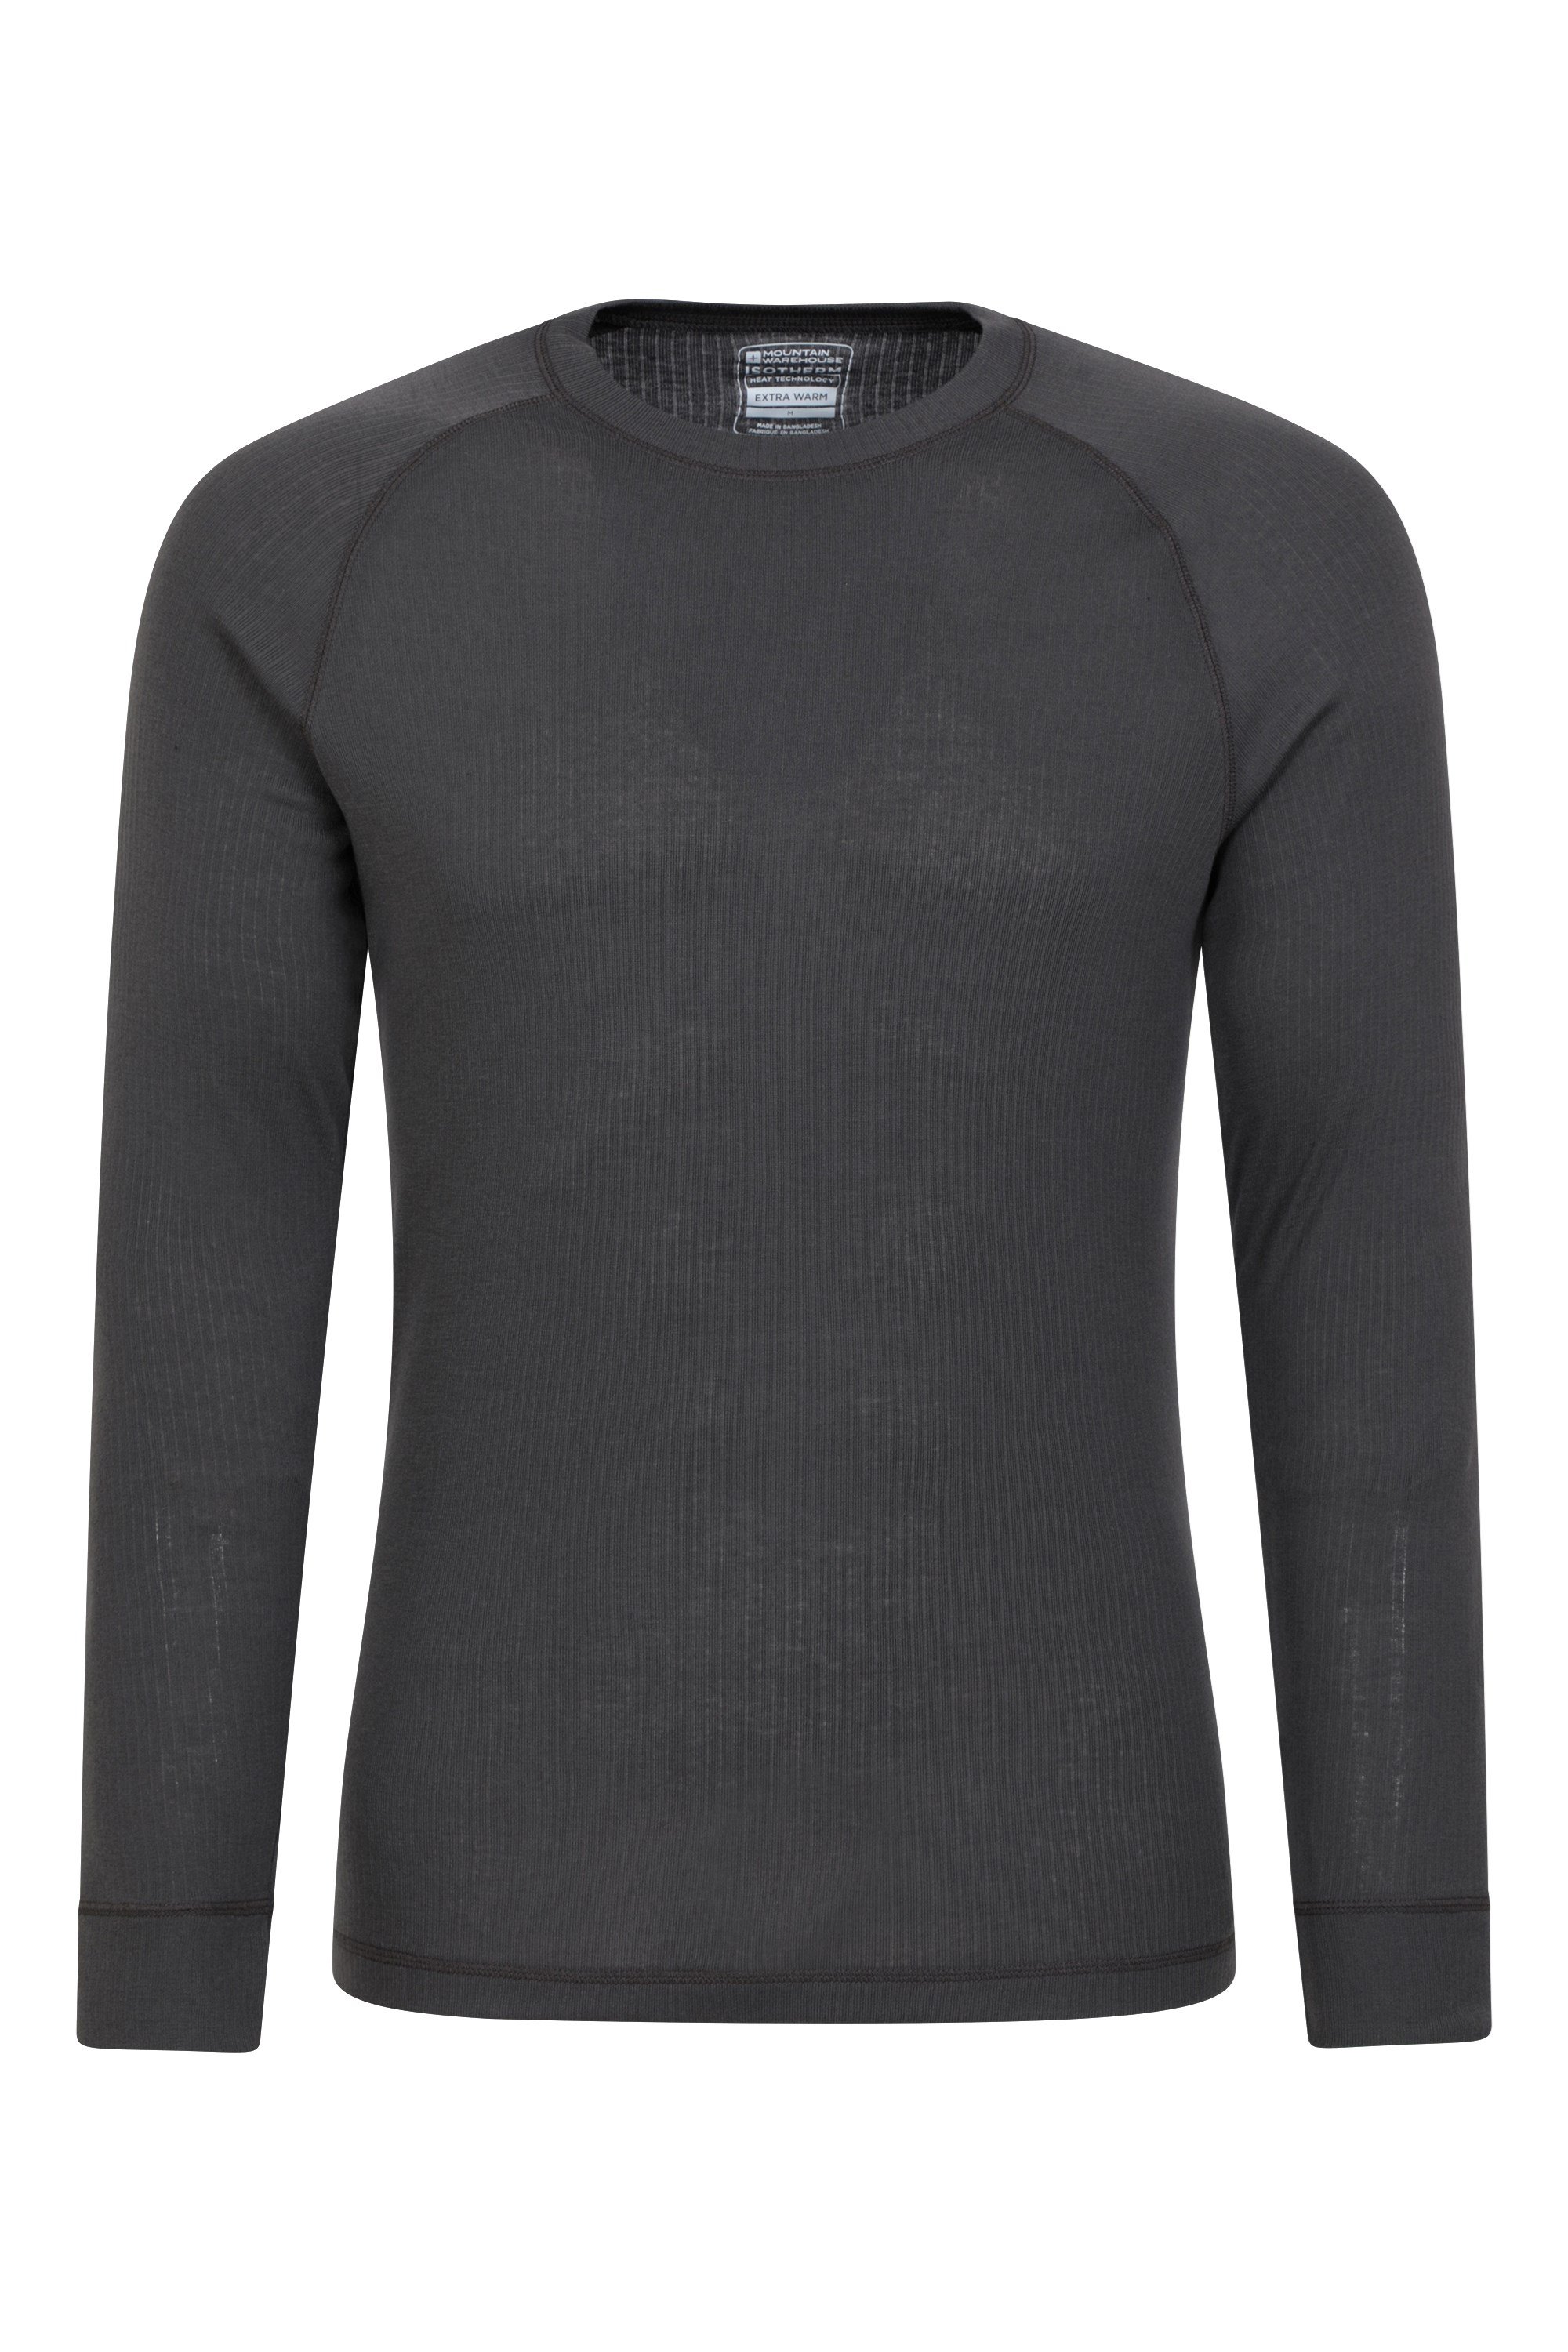 023196 TALUS LS ROUND NECK THERMAL BASELAYER TOP